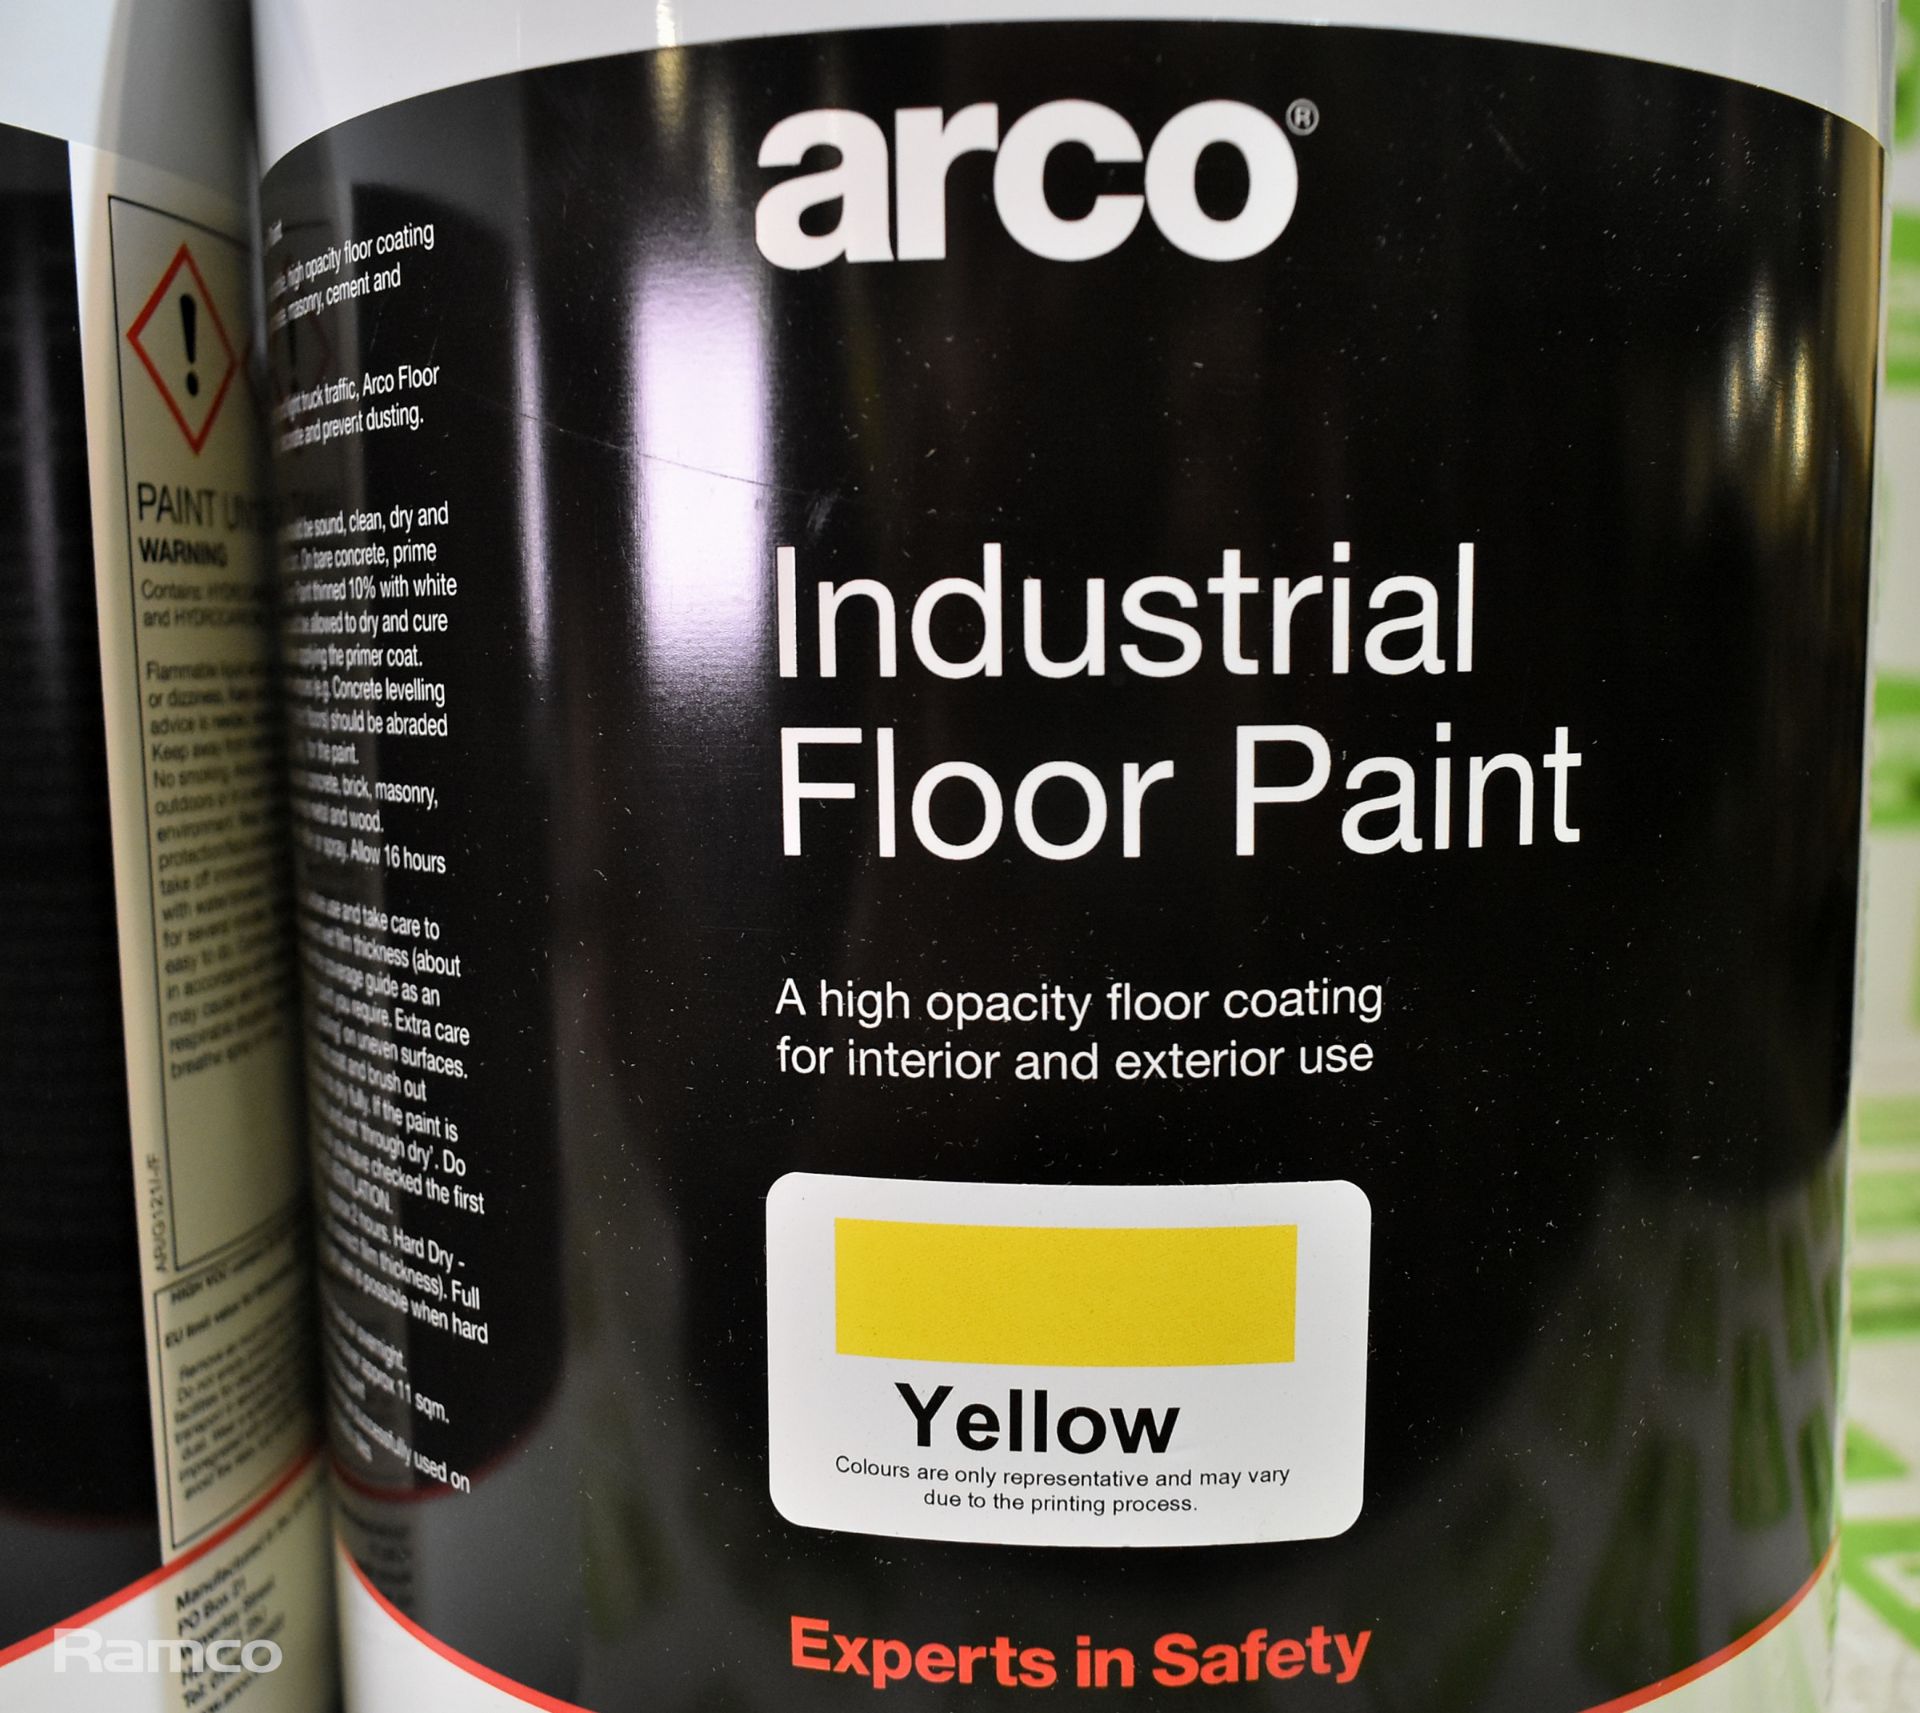 4x 5L tins of yellow Arco industrial floor paint - Image 2 of 2